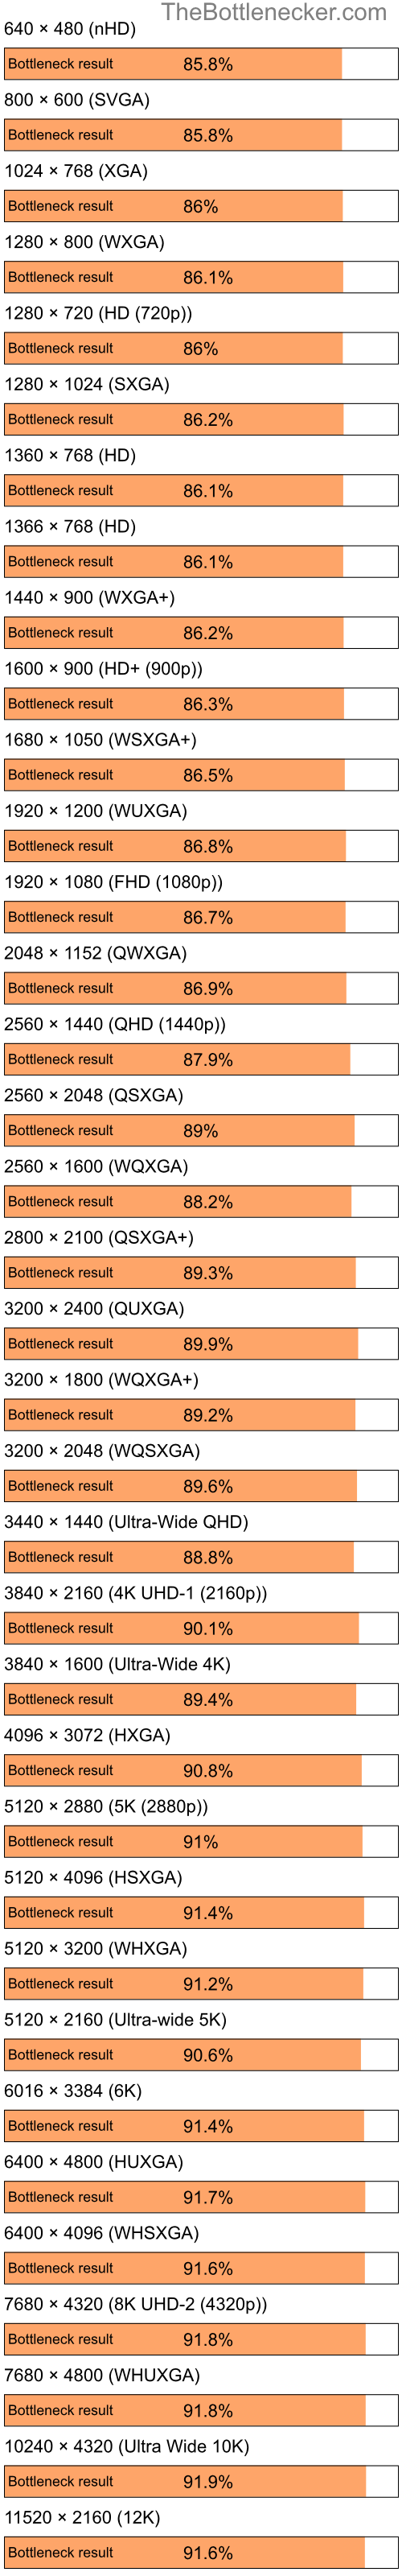 Bottleneck results by resolution for Intel Celeron M 410 and NVIDIA GeForce4 Ti 4200 in Processor Intense Tasks